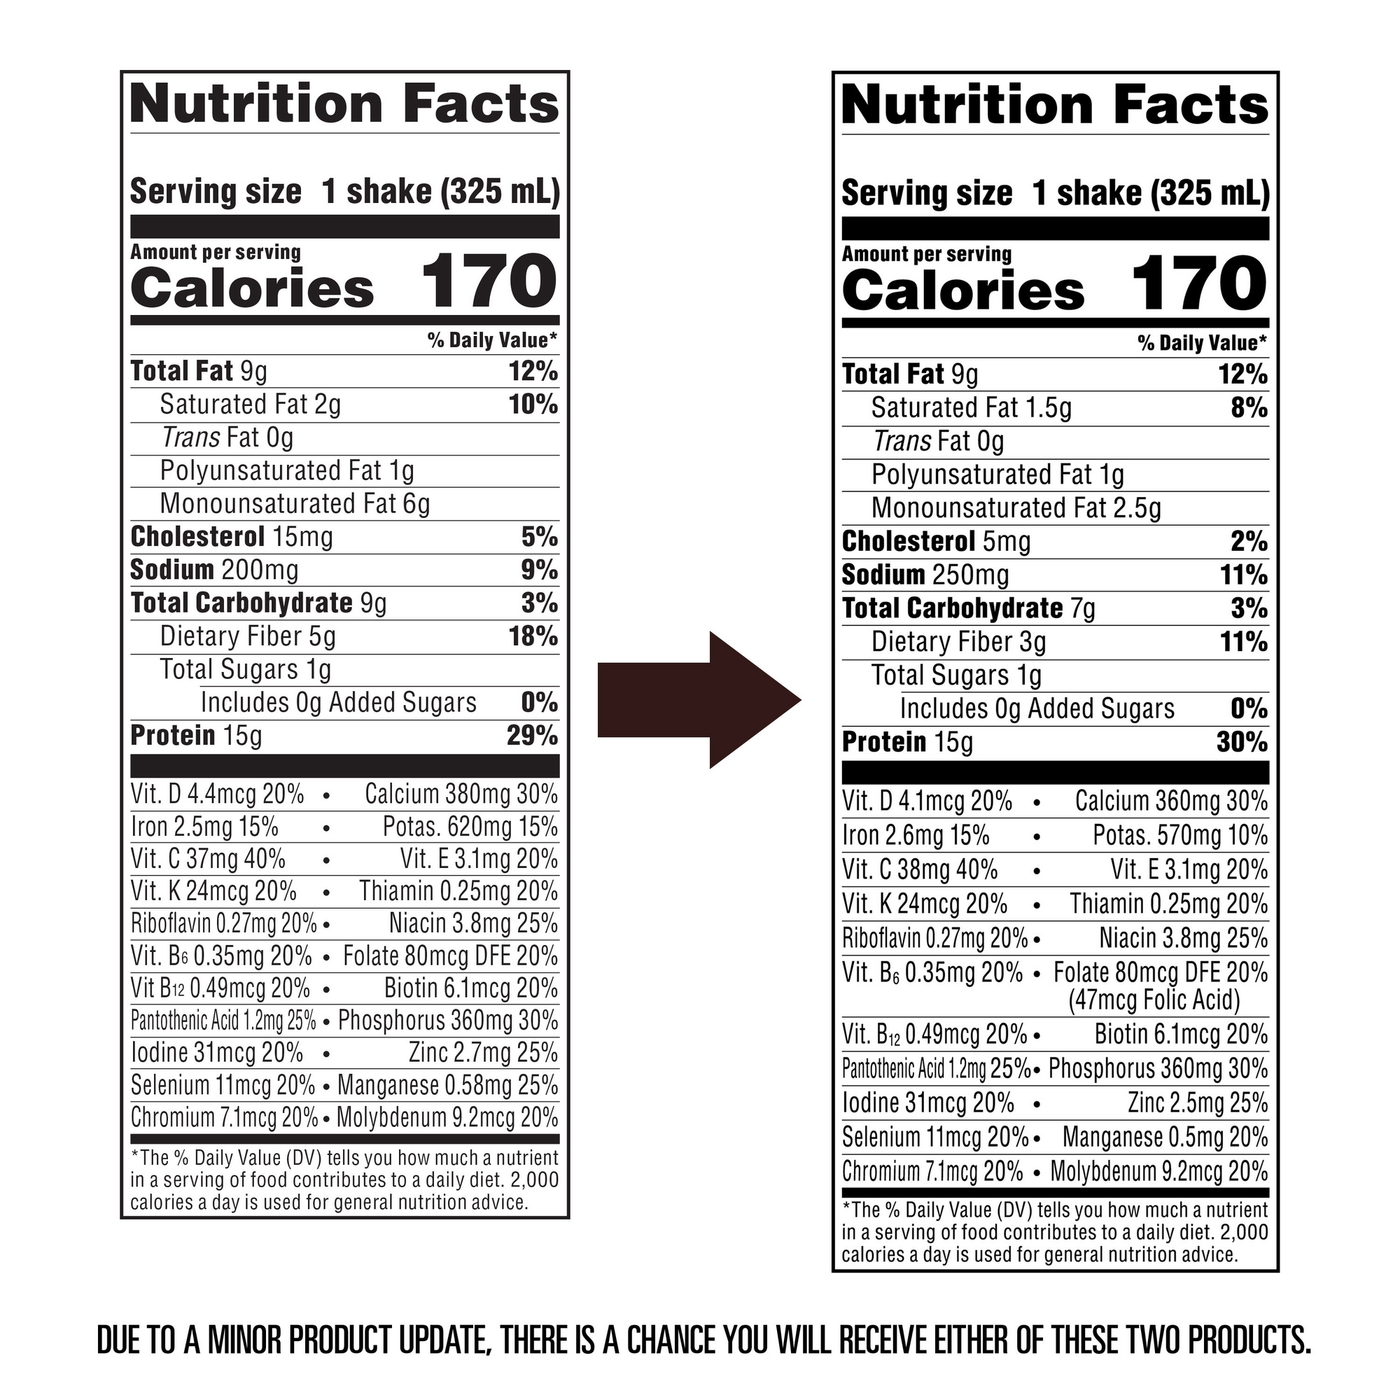 Mocha Latte Shake - Nutrition Facts outdated vs updated